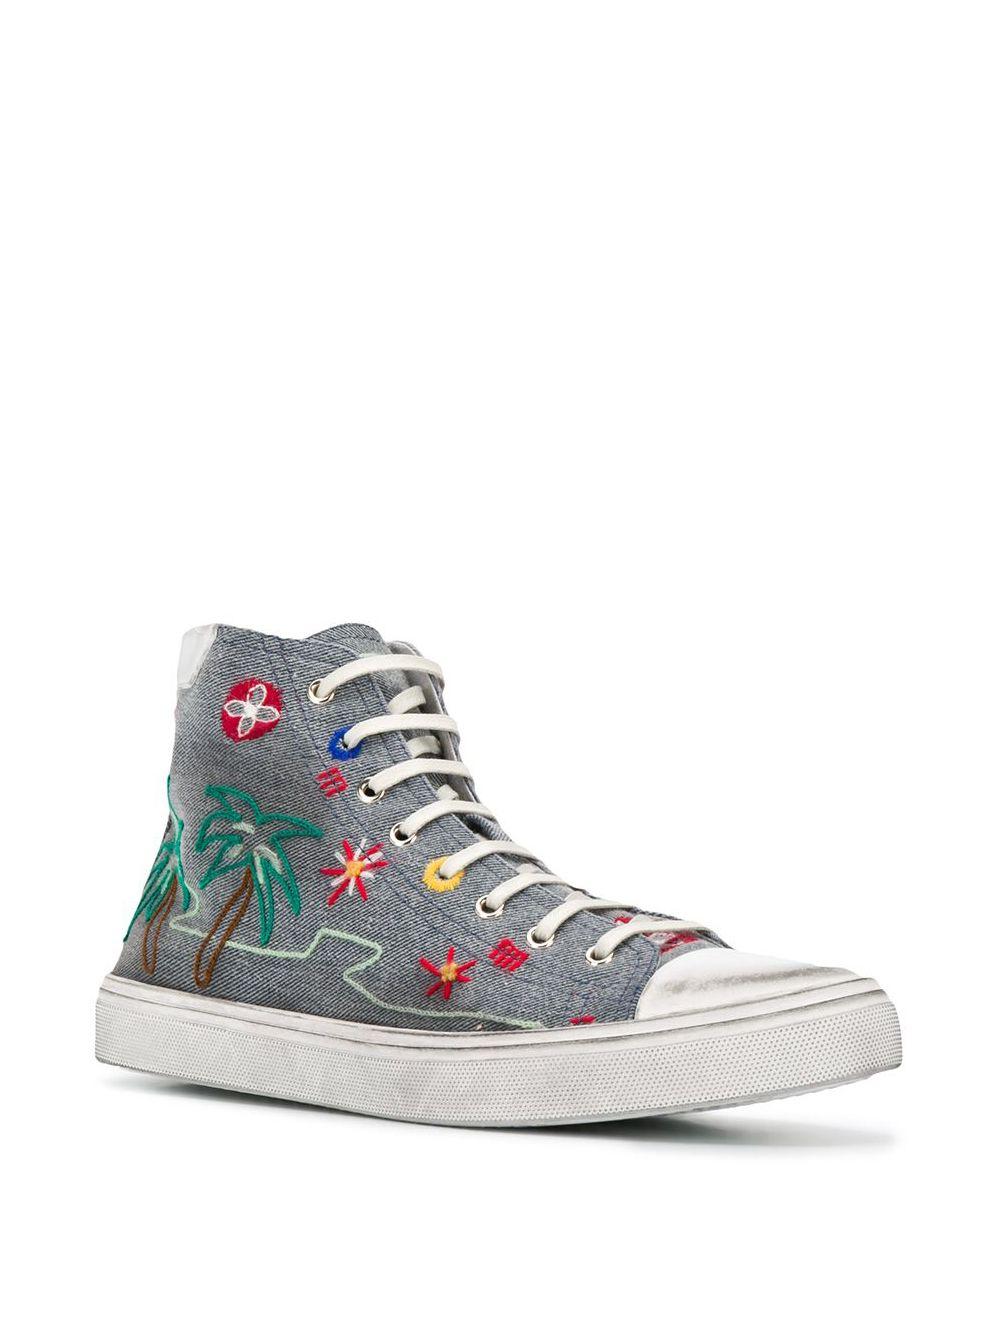 Saint Laurent Tropical-Embroidered High Top Bedford Distressed Sneakers

Established in 1961 by Yves Saint Laurent, French fashion house Saint Laurent is coveted for its quintessential Parisian aesthetic. Showcasing adept craftsmanship alongside